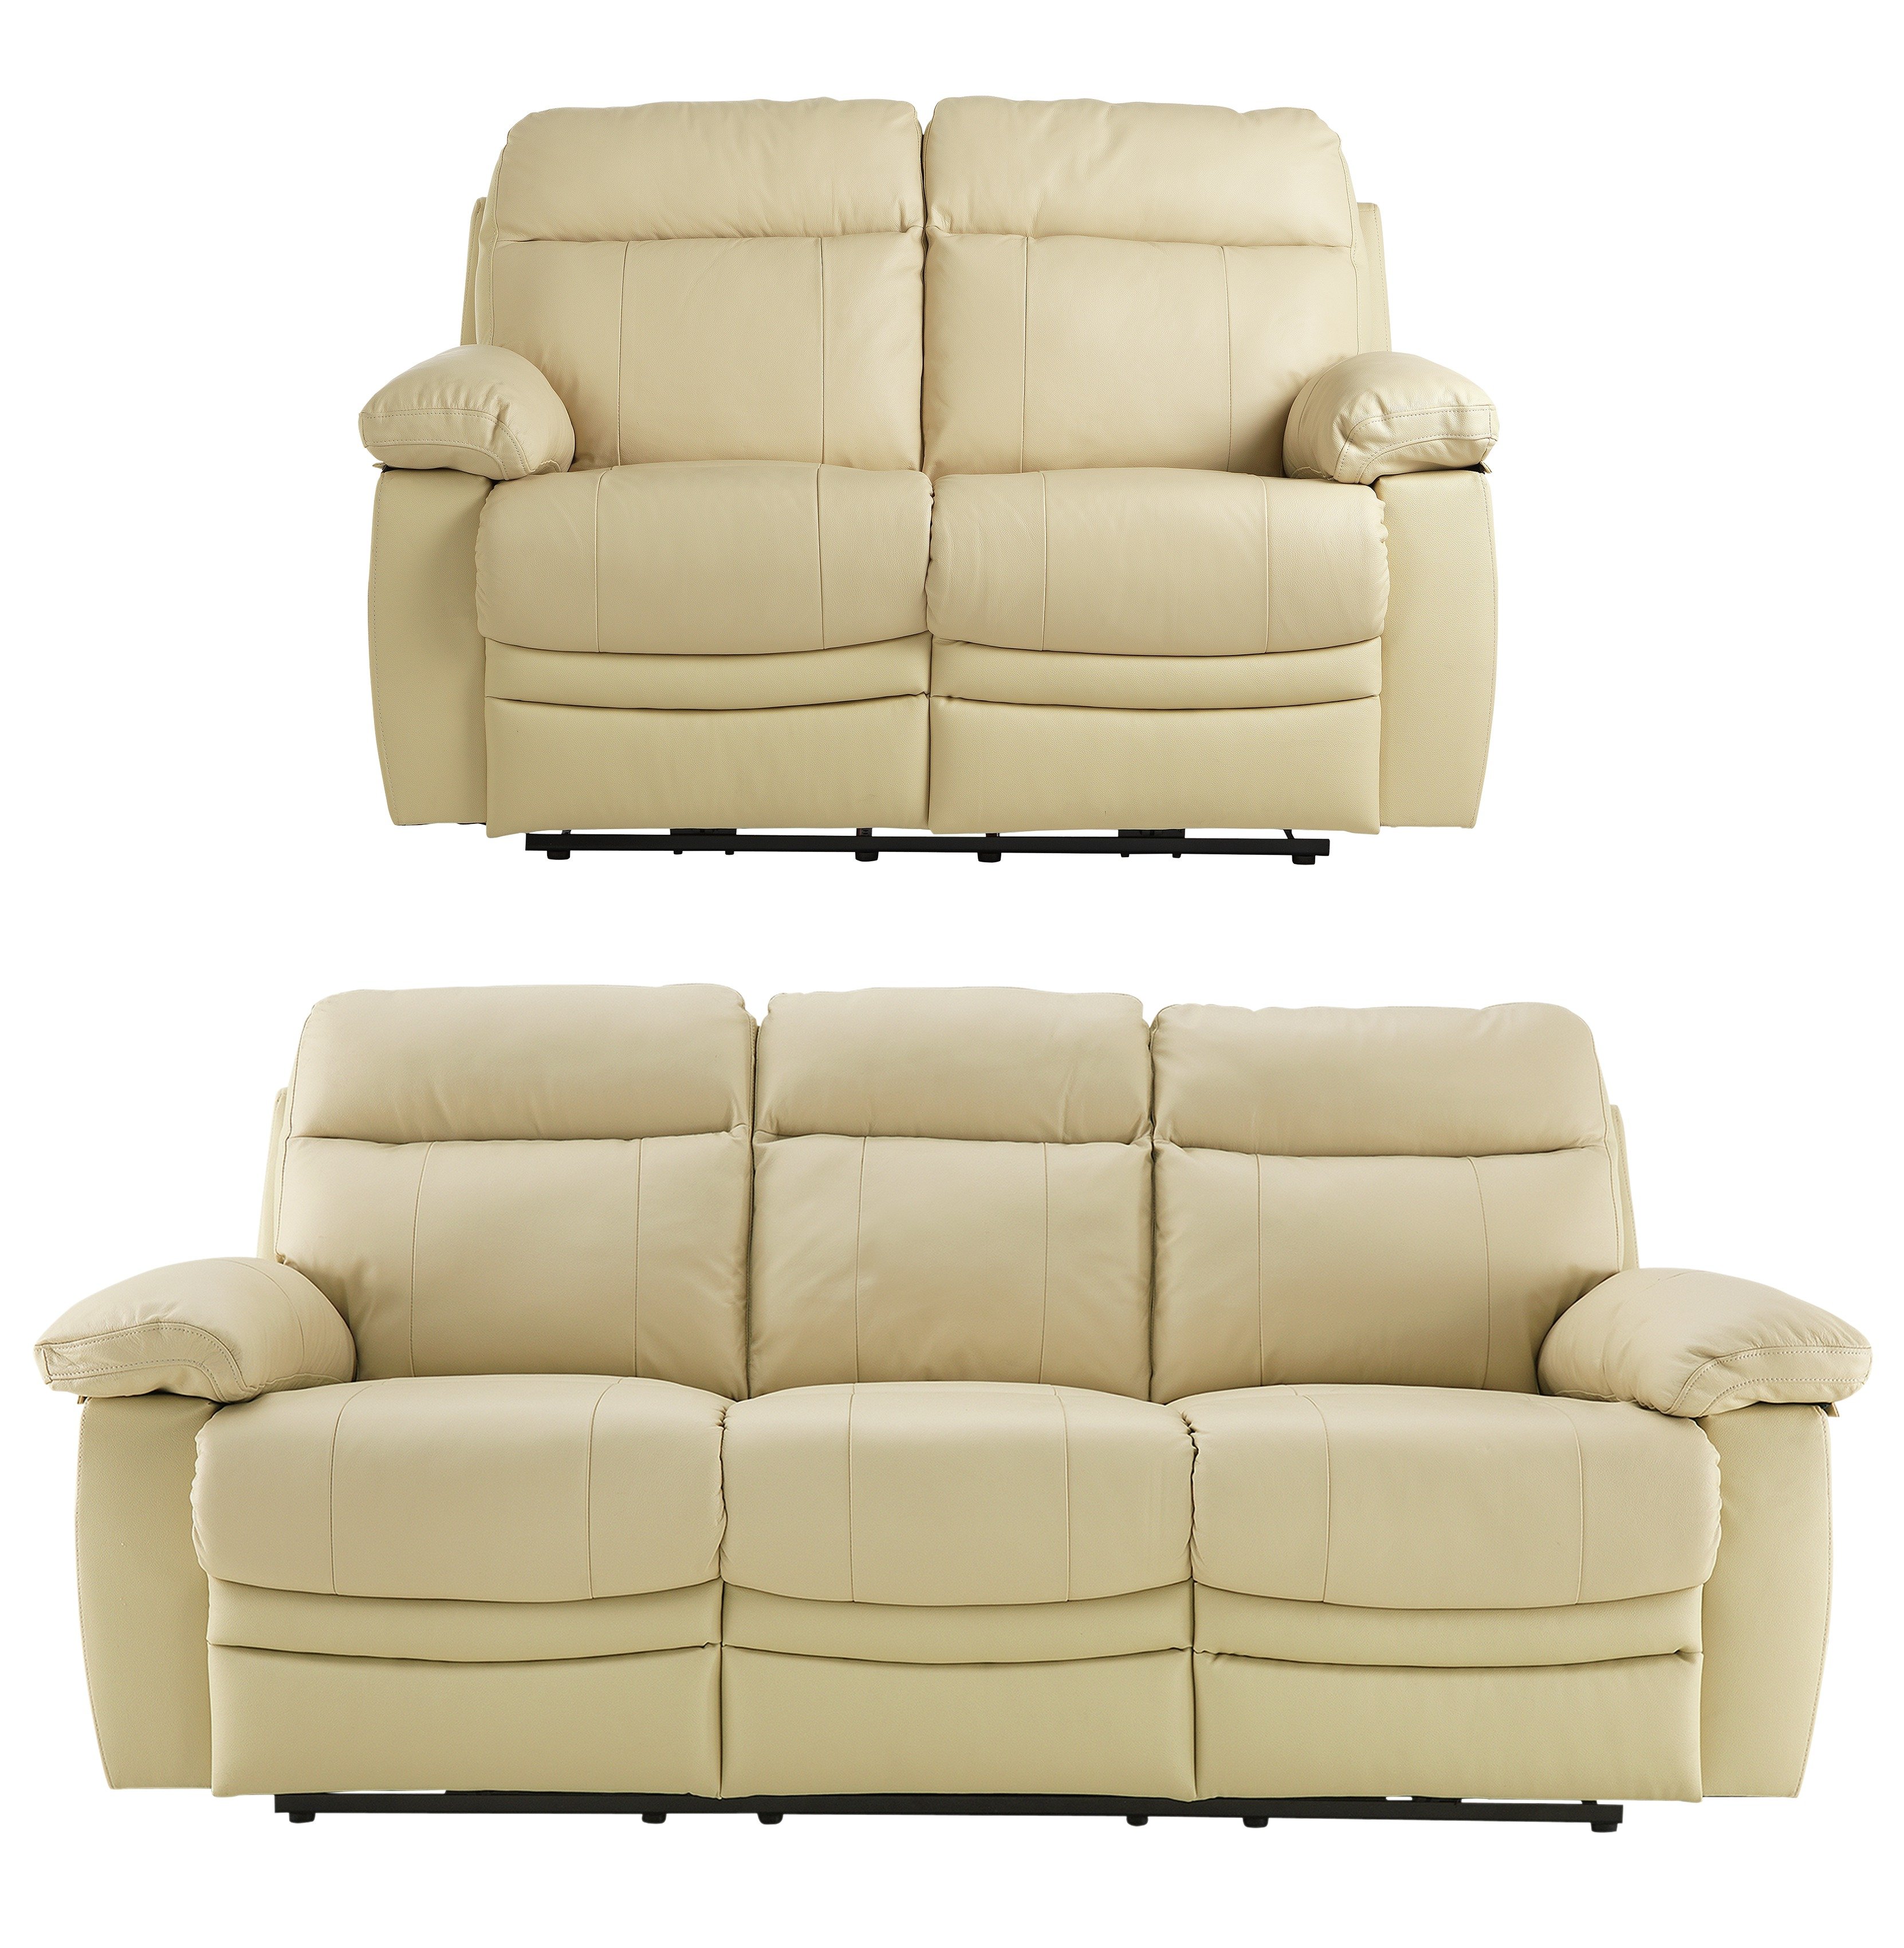 Argos Home Paolo 2 & 3 Seater Power Recliner Sofas - Ivory